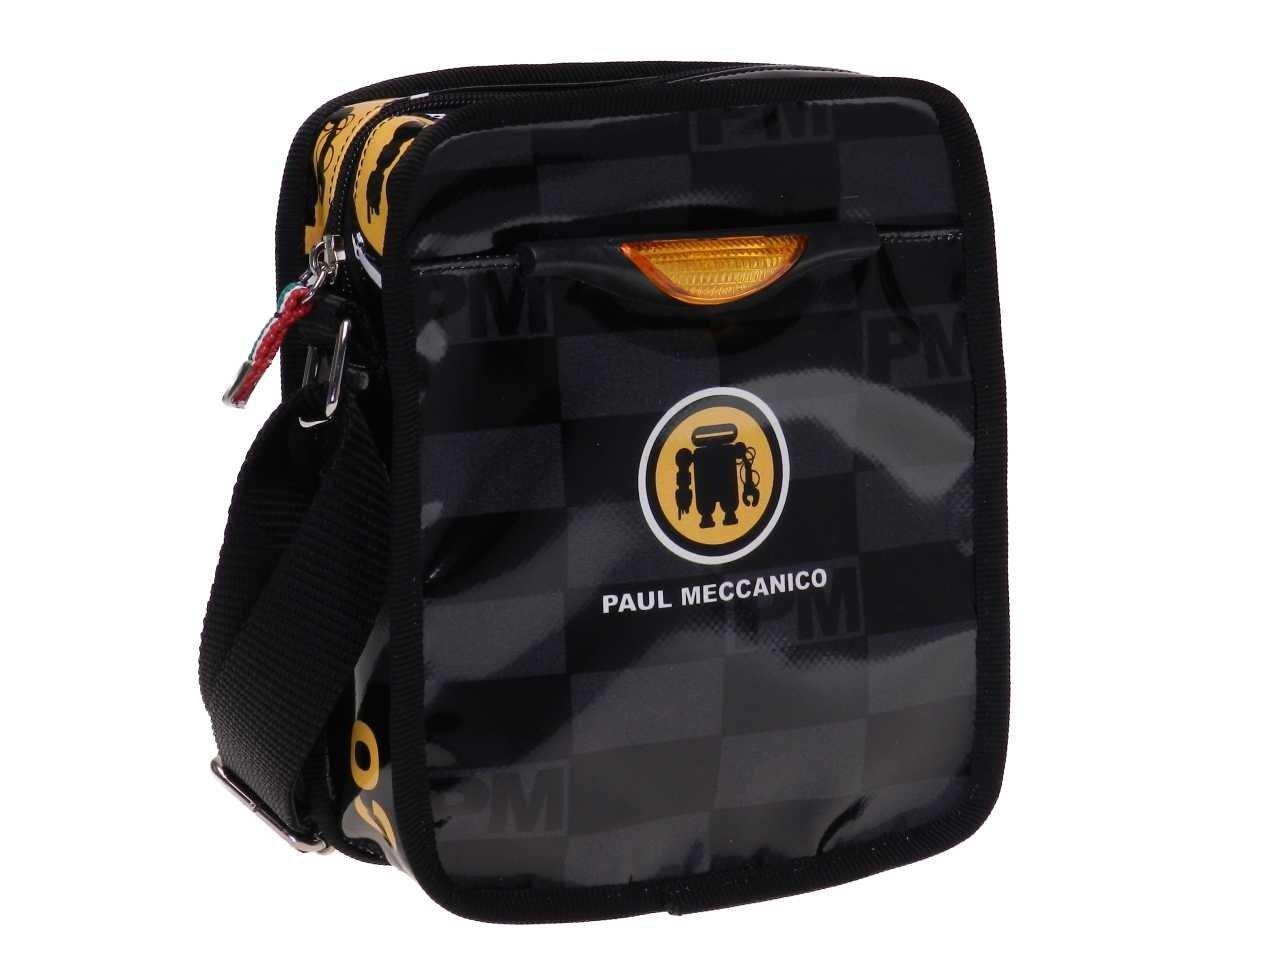 SHOULDER BAG BLACK AND GREY COLOURS GEOMETRIC FANTASY. STRATOS MODEL MADE OF LORRY TARPAULIN. - Limited Edition Paul Meccanico